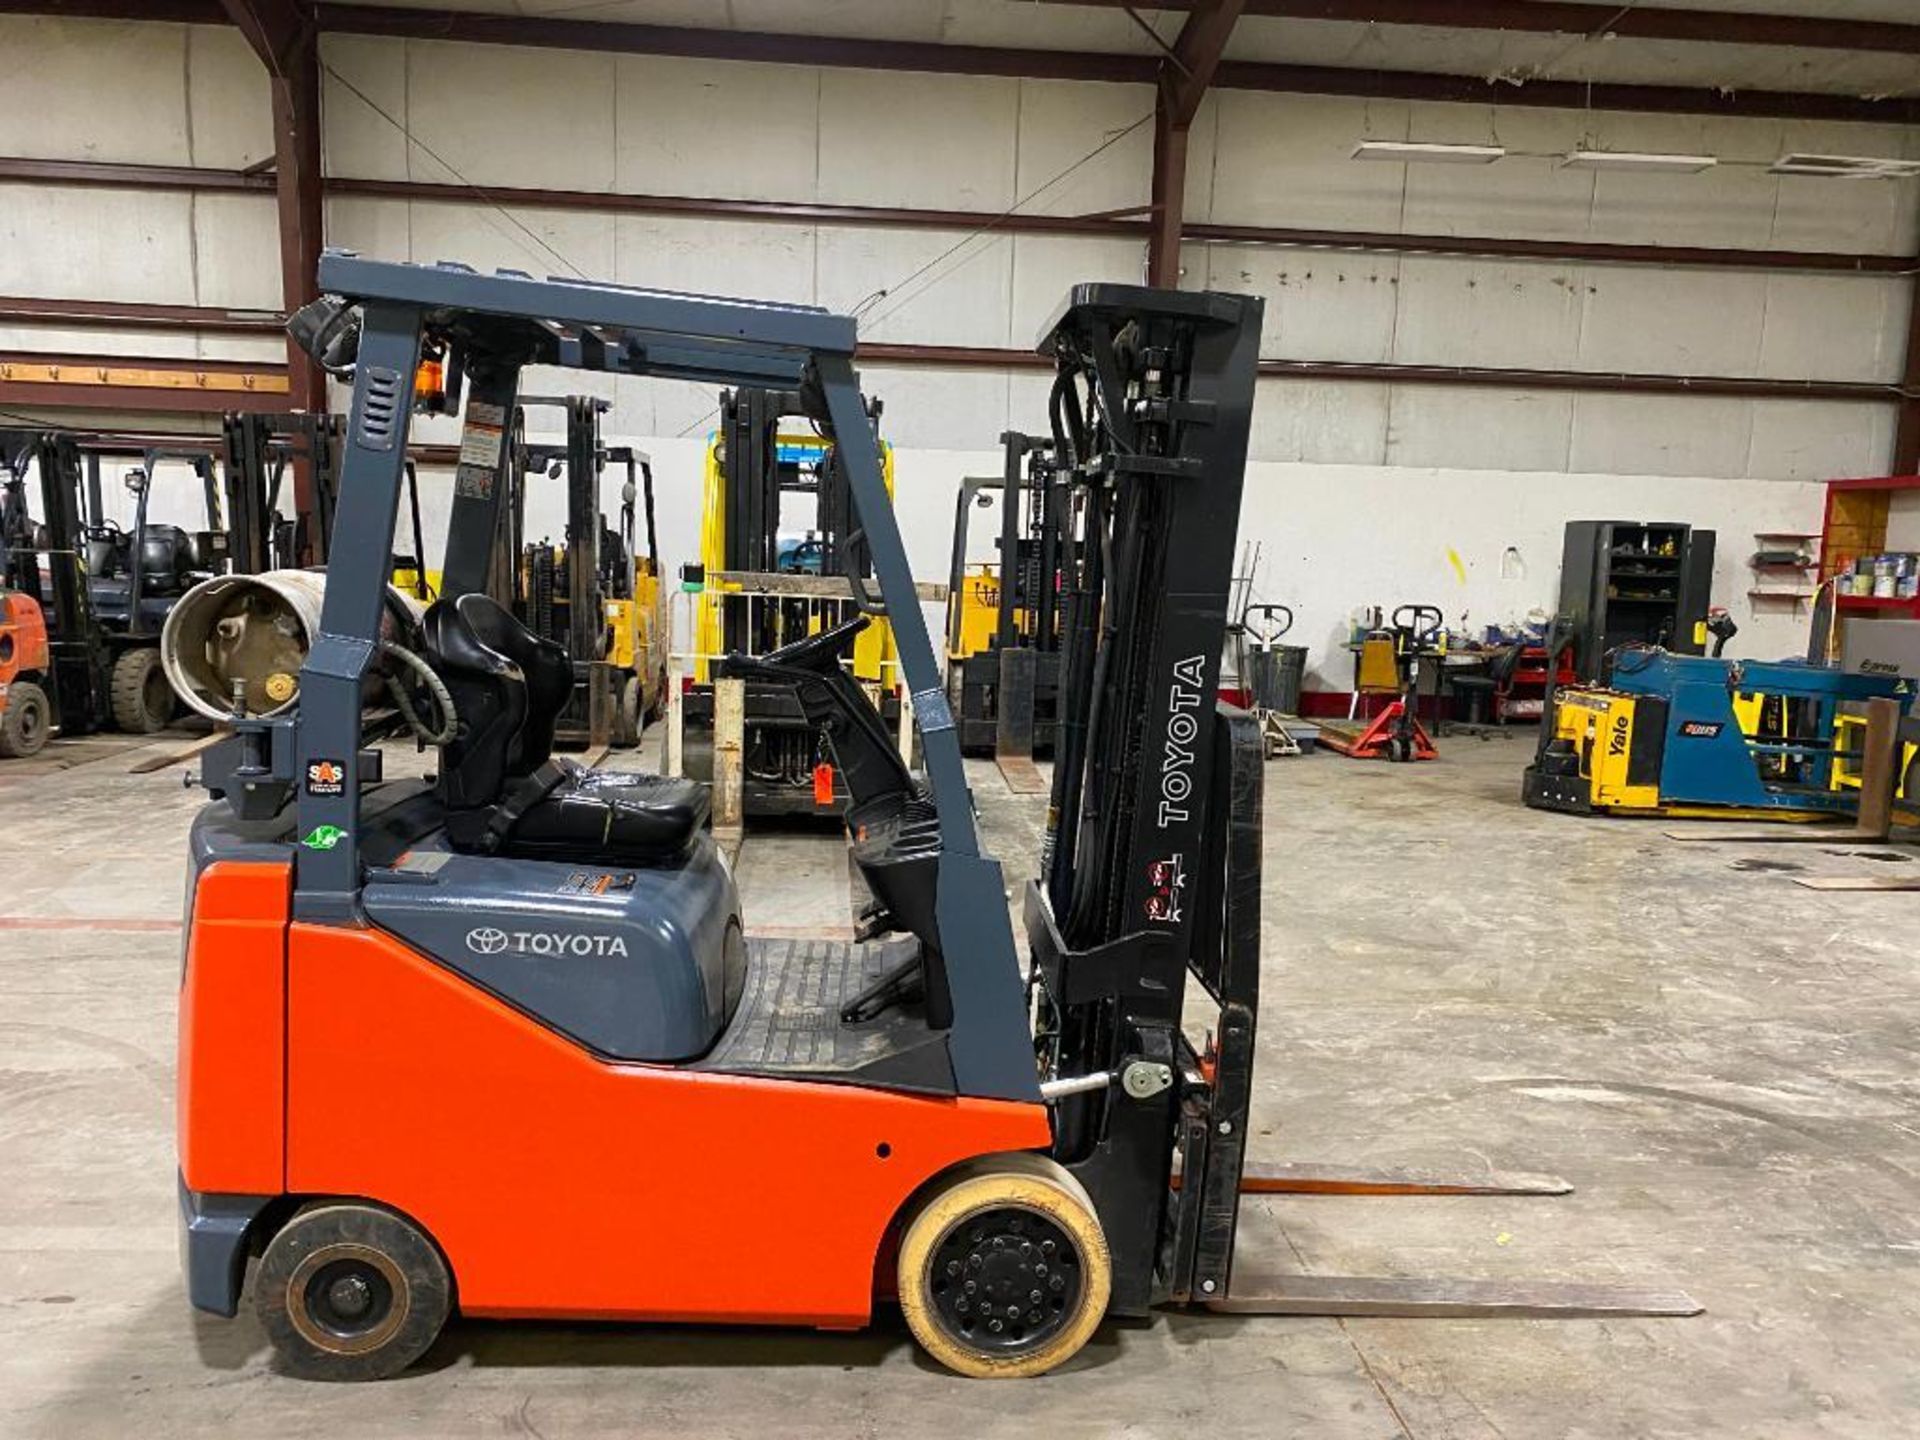 2018 Toyota 3,000-LB. Capacity Forklift, Model 8FGCU15, S/N 39697, LPG, Non-Marking Cushion Tires, 3 - Image 3 of 5